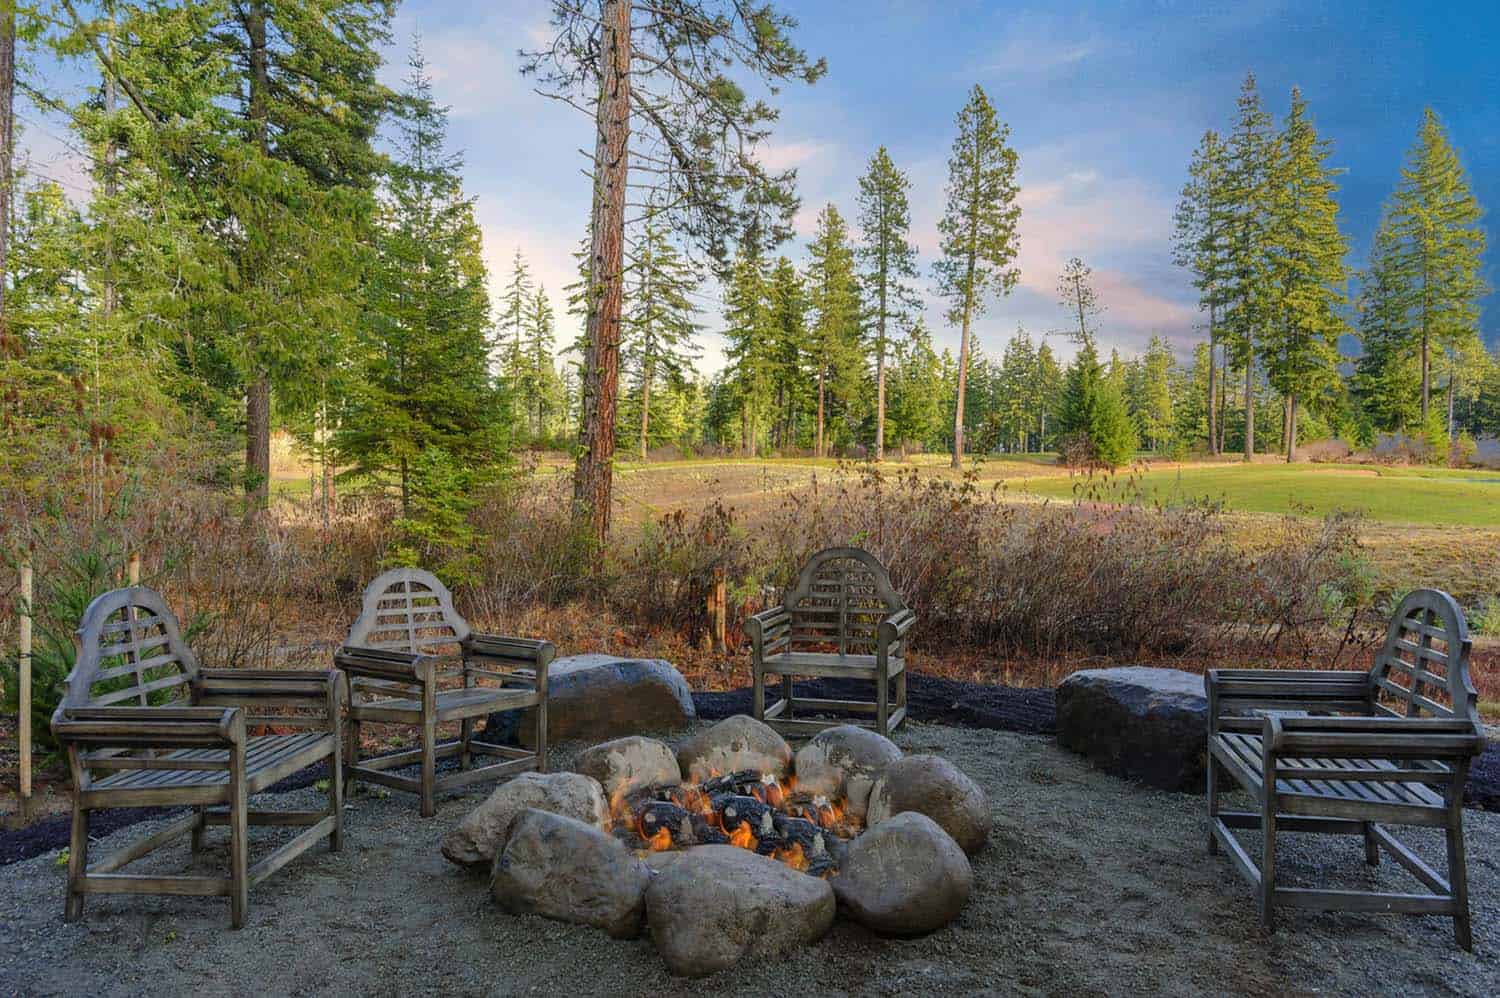 28 Inspiring Fire Pit Ideas To Create A, Natural Gas Fire Pit Ideas